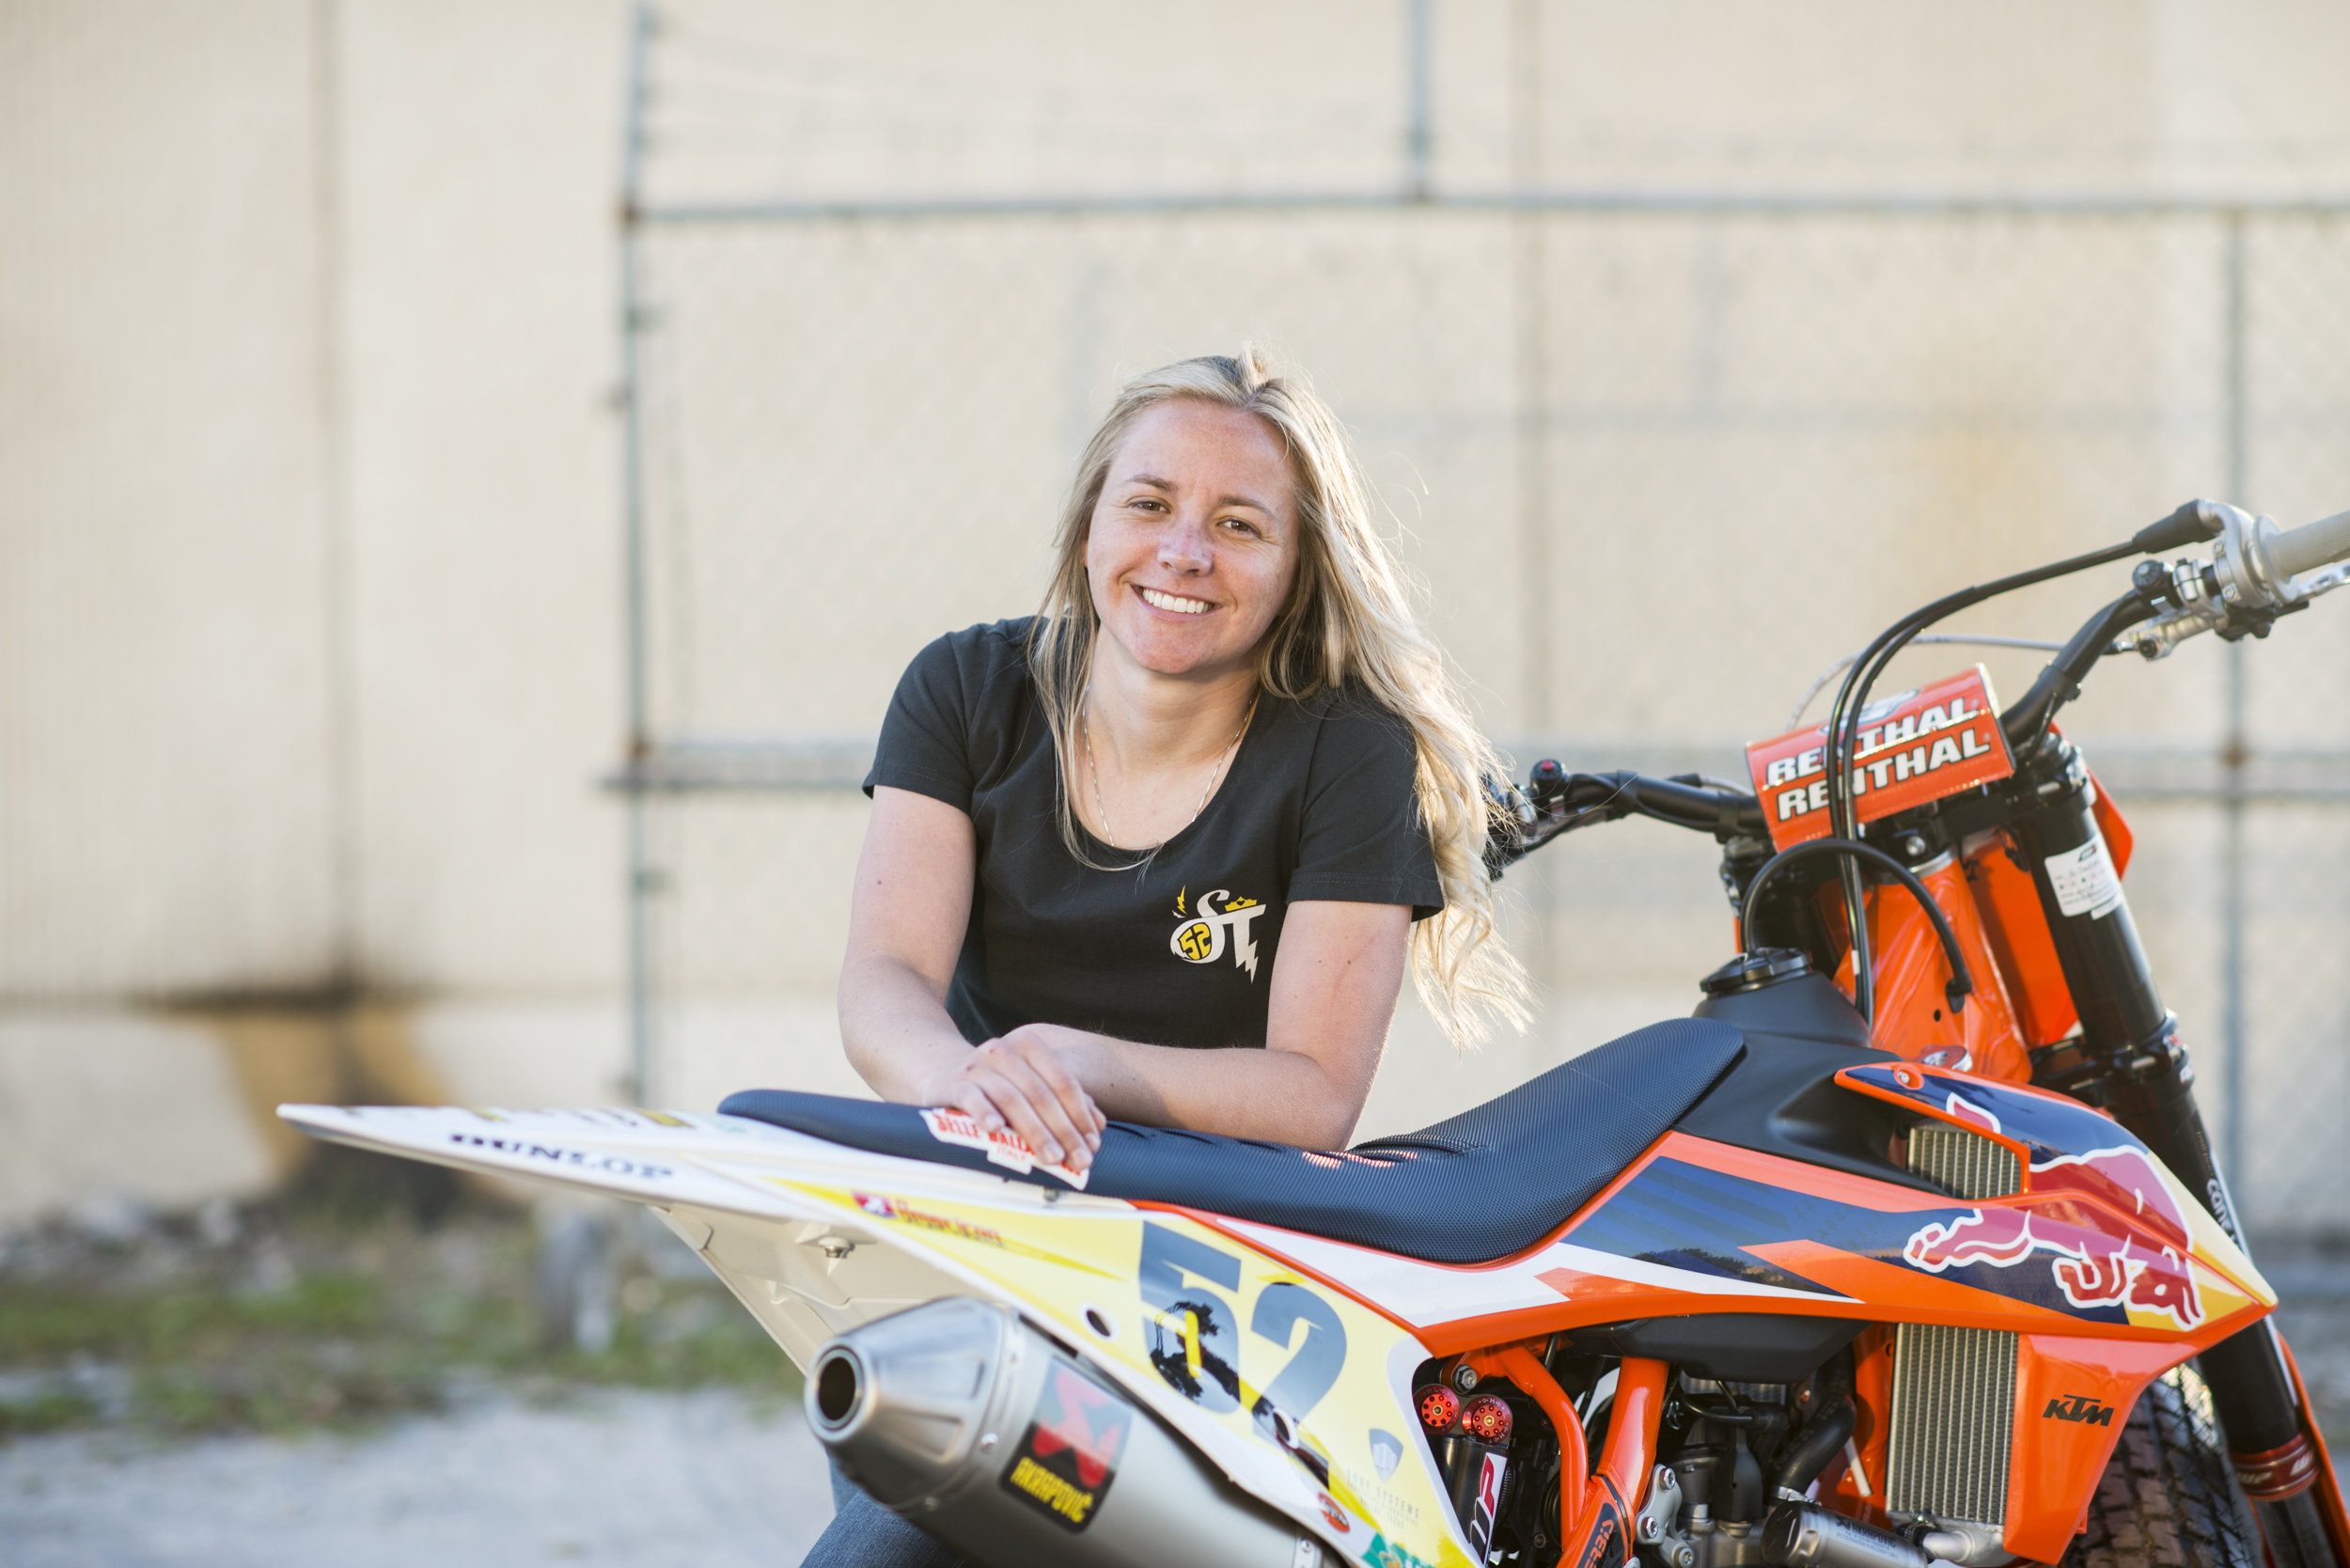 American Flat Track’s Shayna Texter Inks Deal with Red Torpedo Clothing as Queen of Hearts 